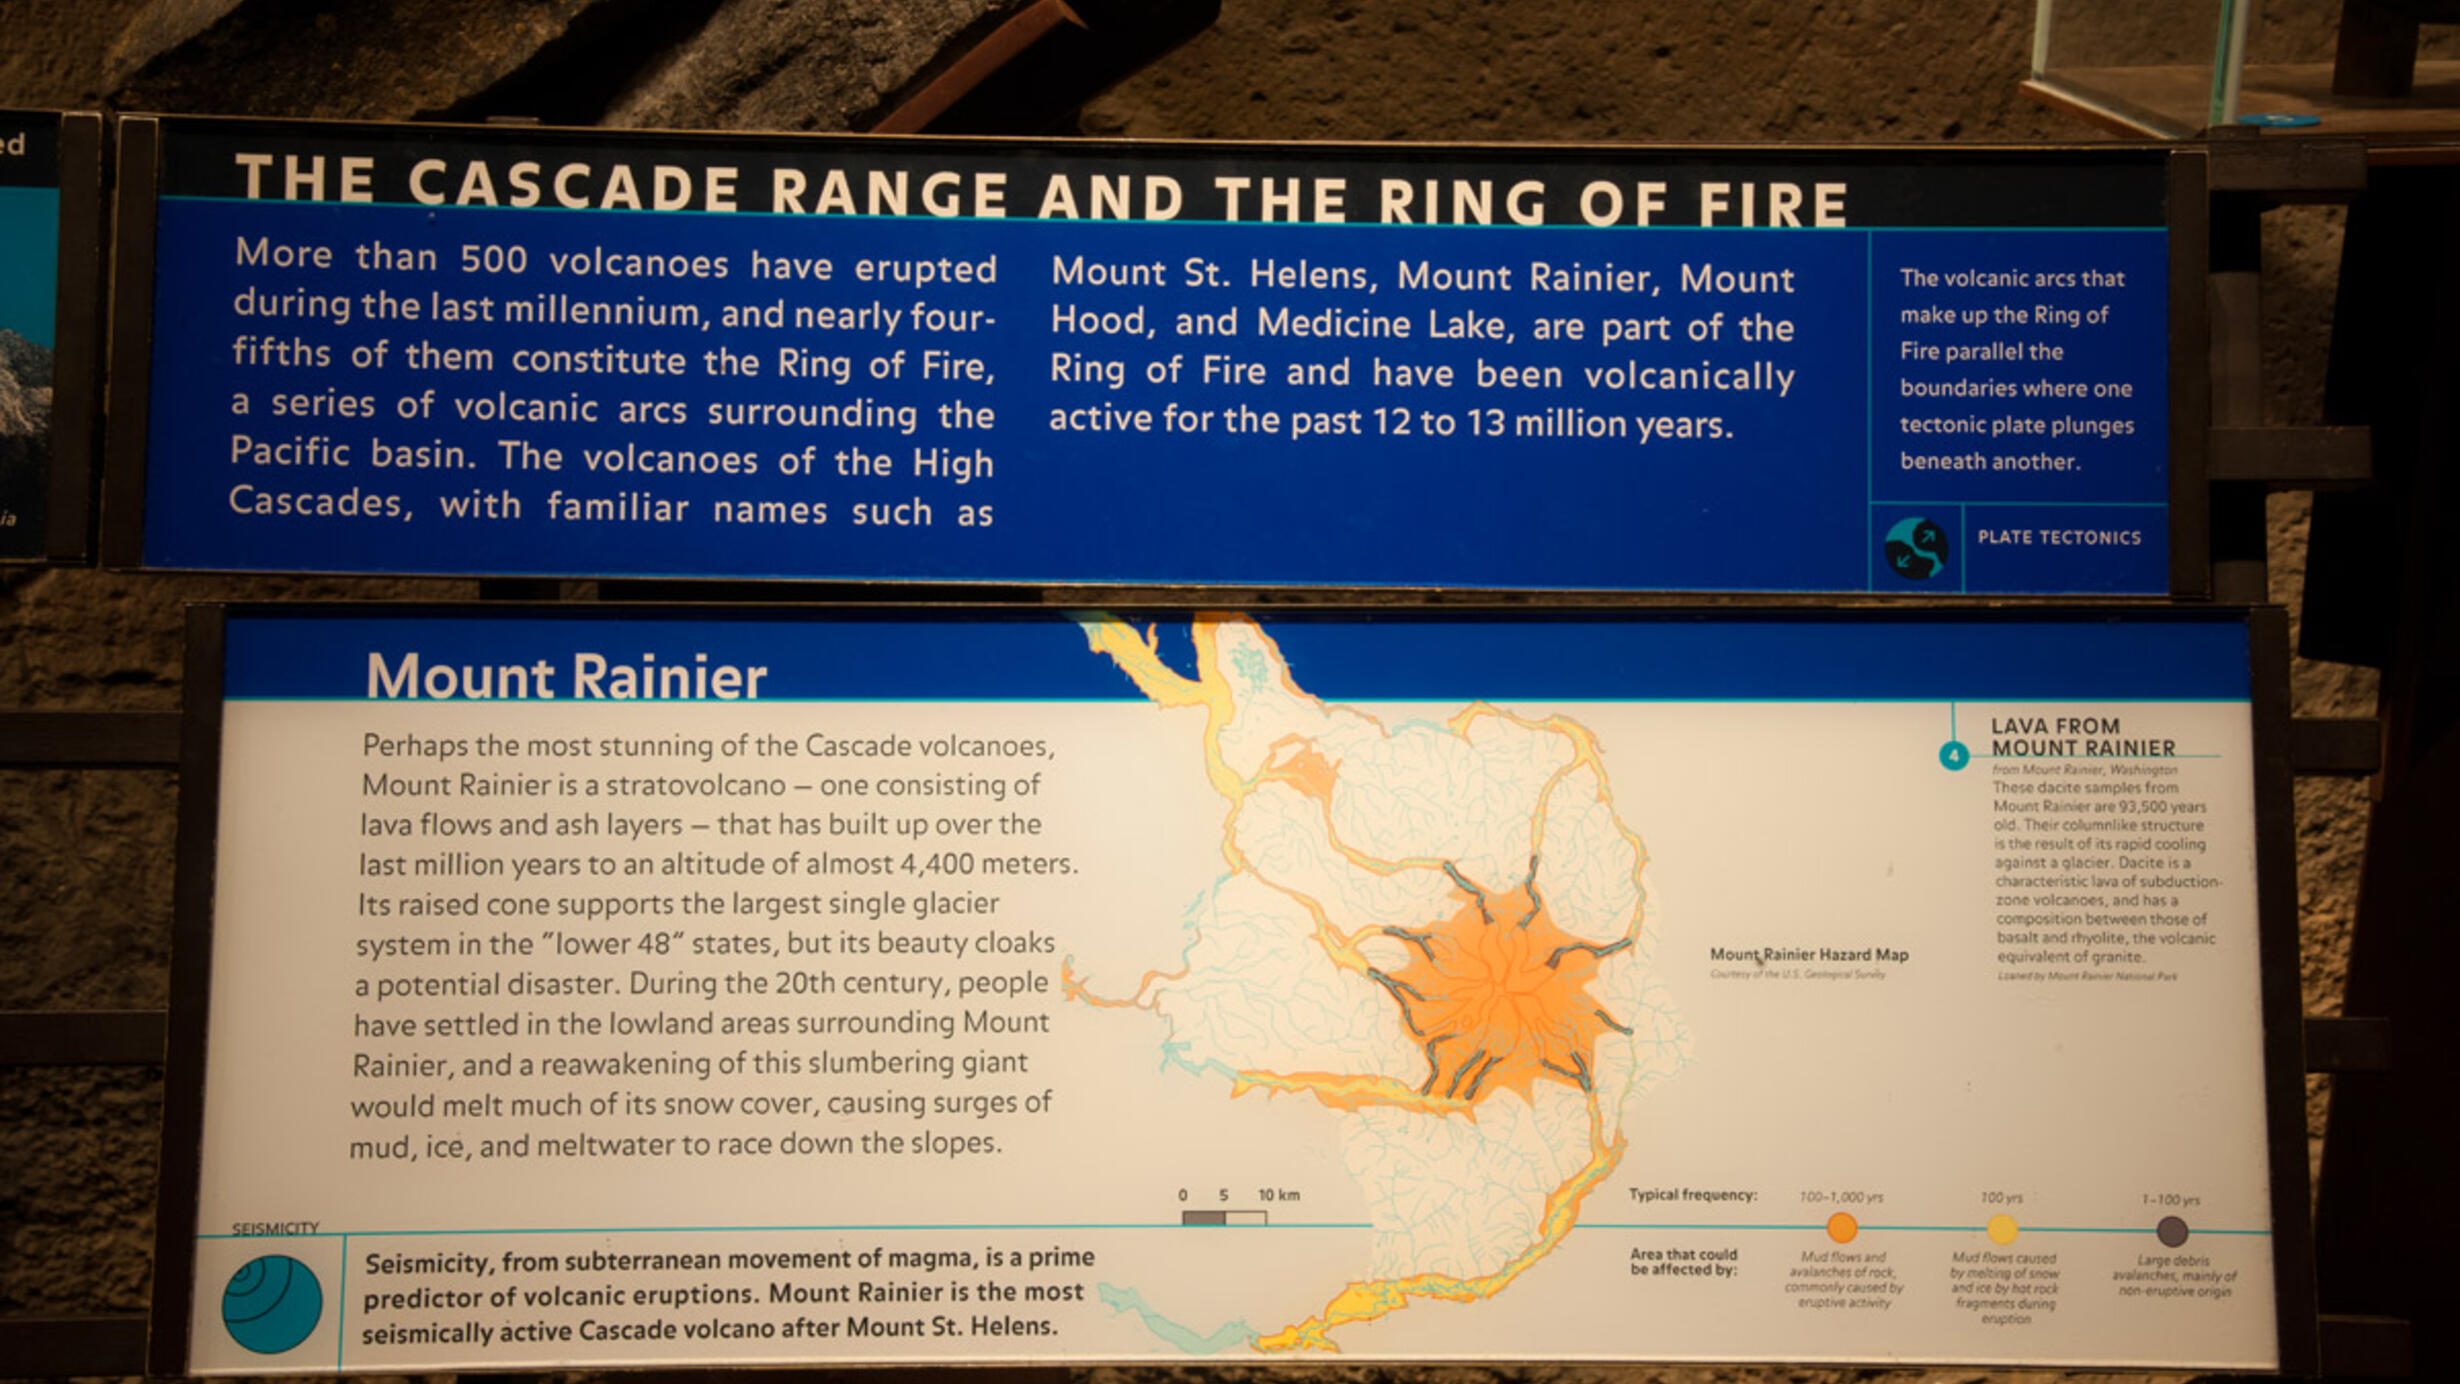 The Cascade Range and the Ring of Fire